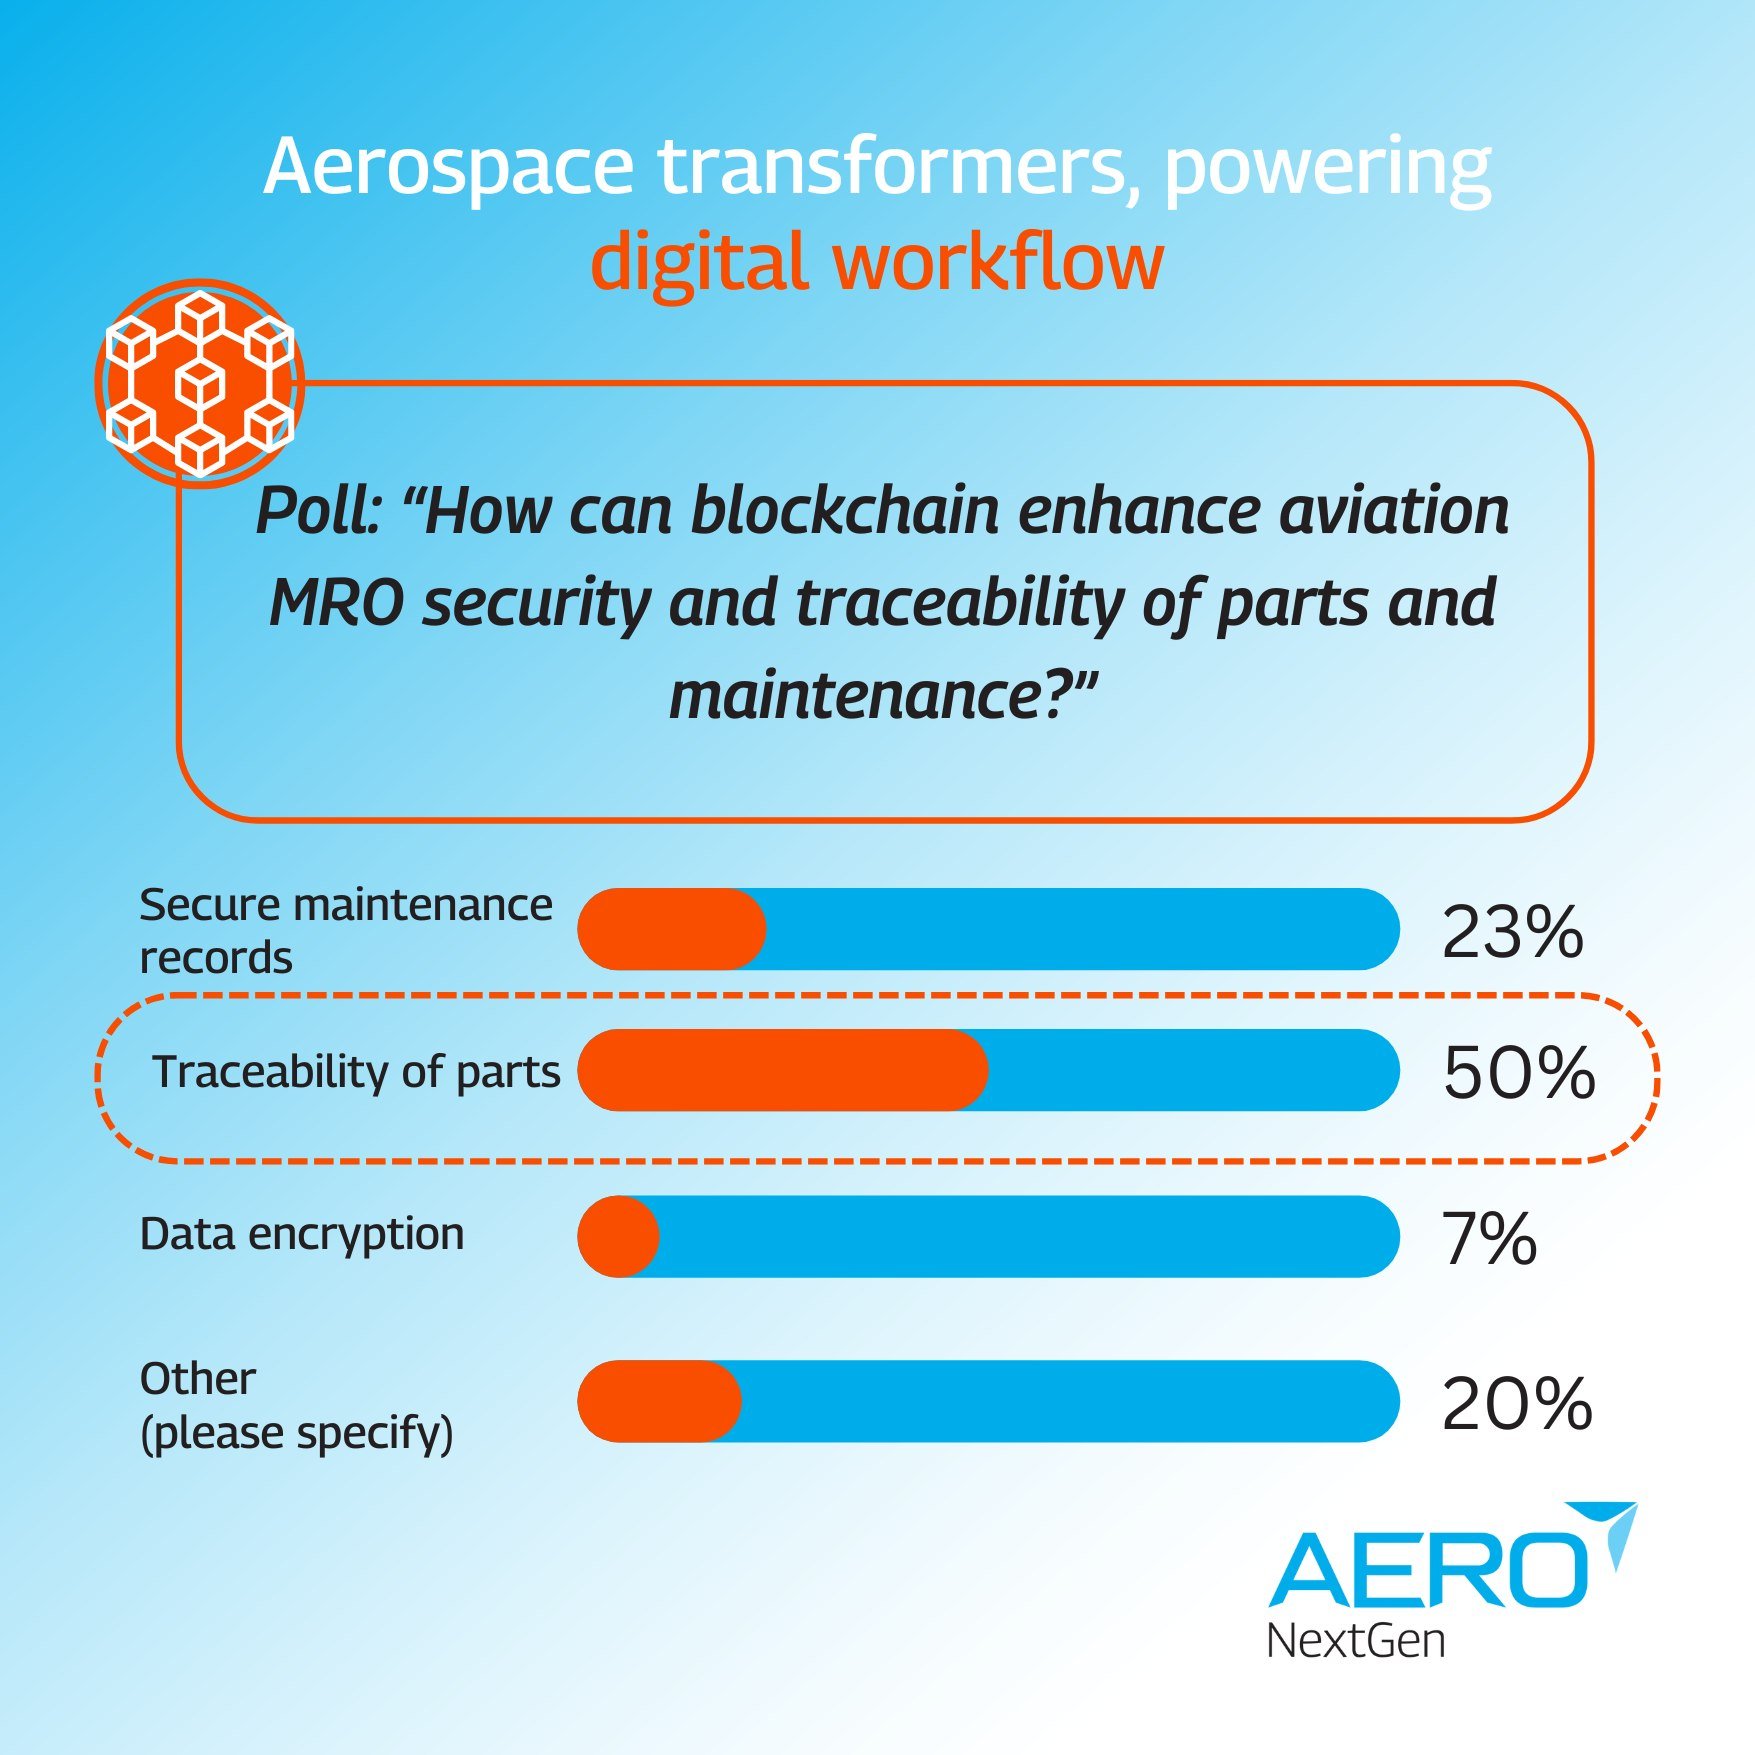 THE RESULTS ARE IN | Blockchain's Impact on Aviation MRO 📊🔗

Thank you to everyone who participated in our latest poll on how blockchain technology can enhance aviation MRO security and traceability. The votes are counted, and the results are clear